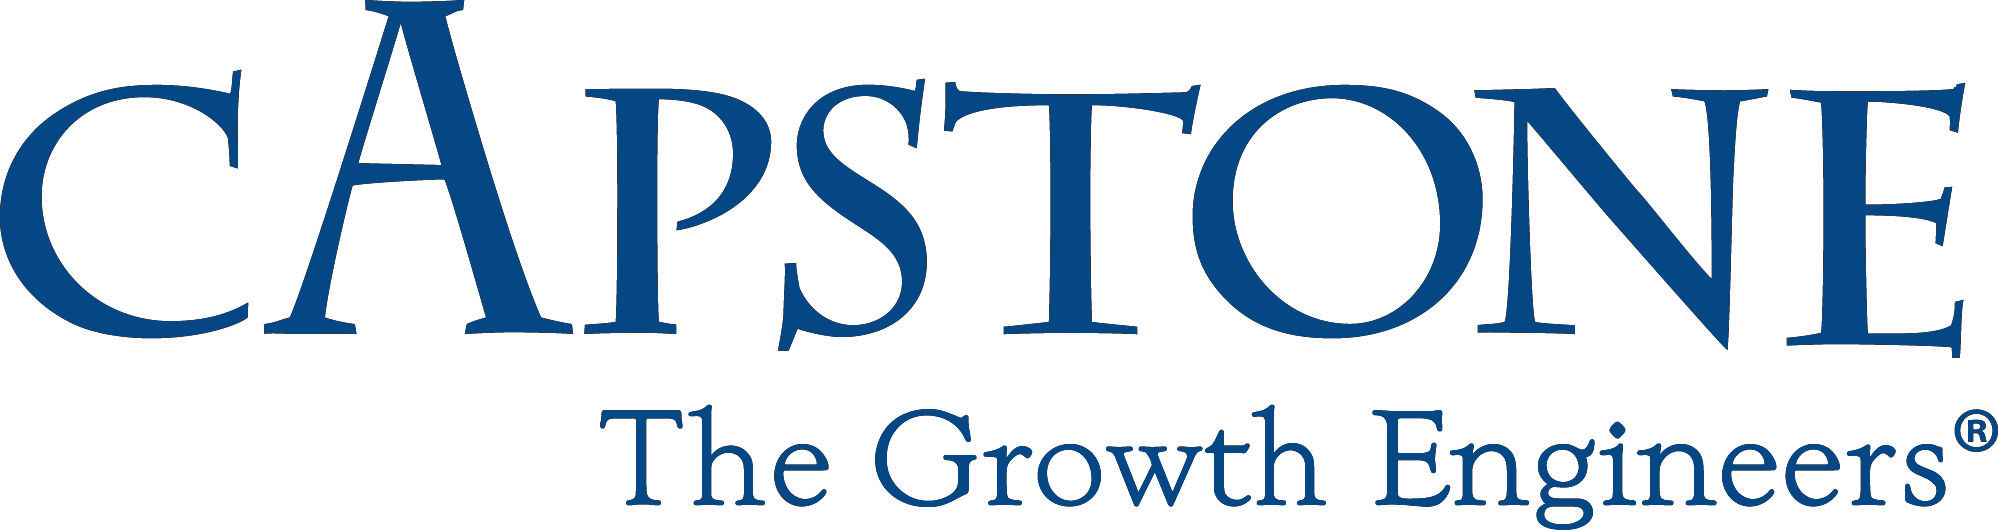 Capstone is the meeting point of passion and process in the field of mergers and acquisitions. Founded in 1995, we focus on helping middle market companies grow quickly, safely, and profitably.